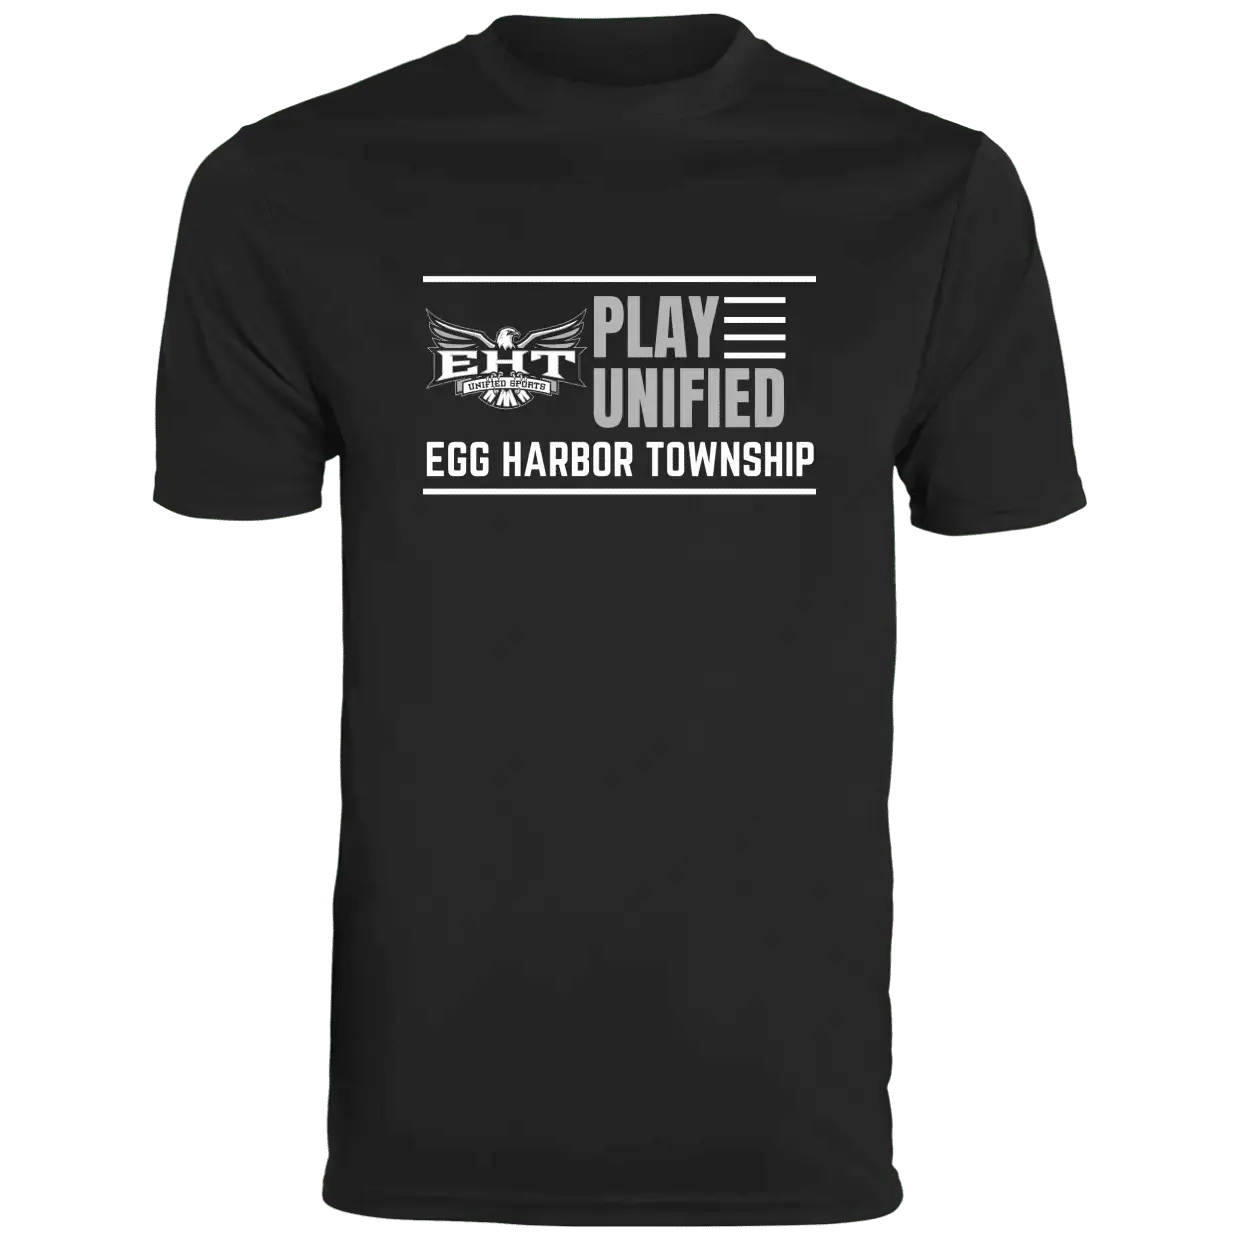 EHT Unified Sports Reveal Tees